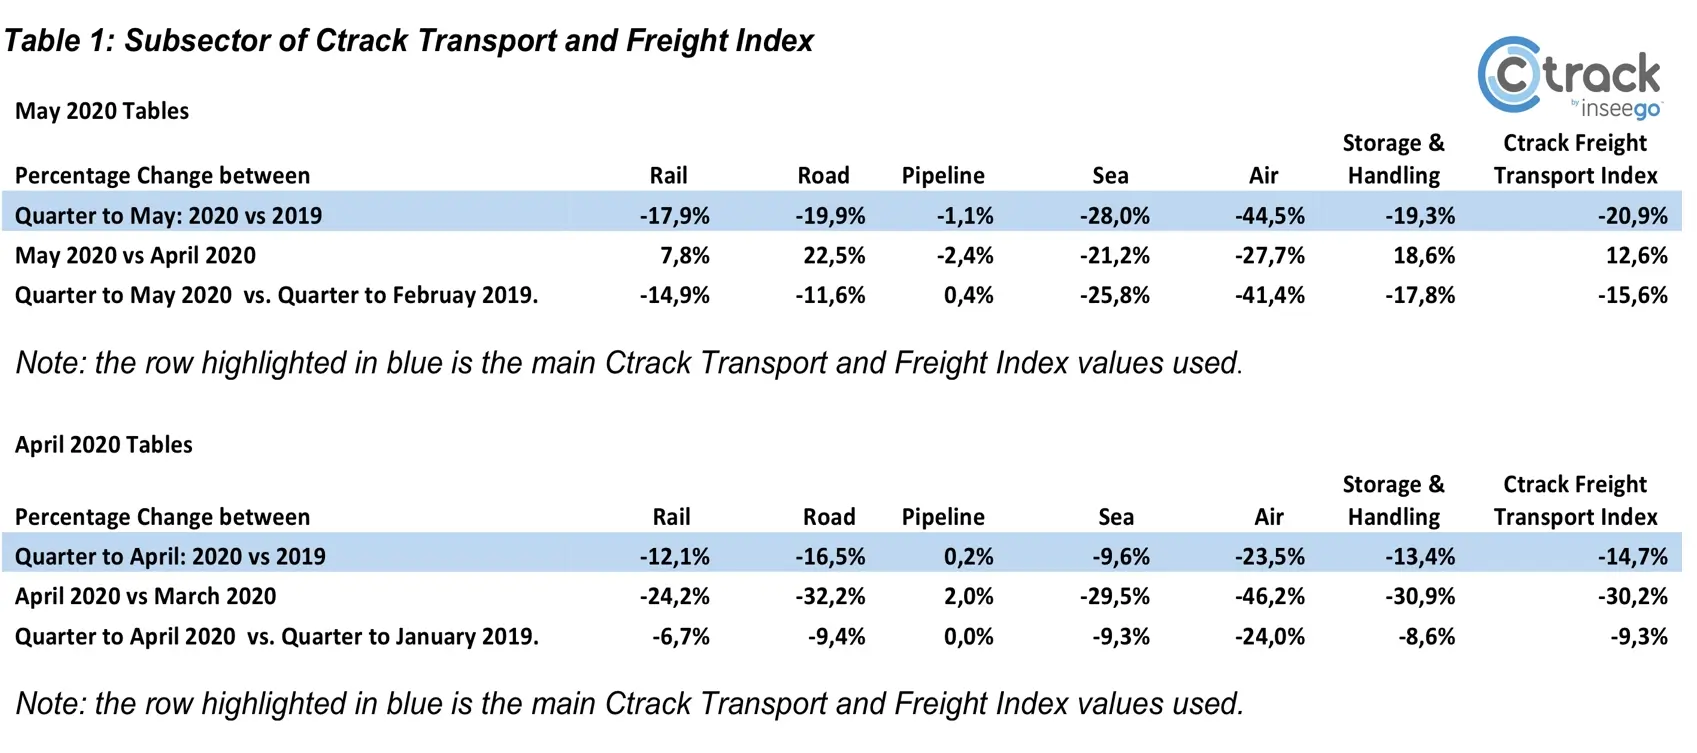 Table 1 - Subsector of Ctrack Transport and Freight Index - June 2020